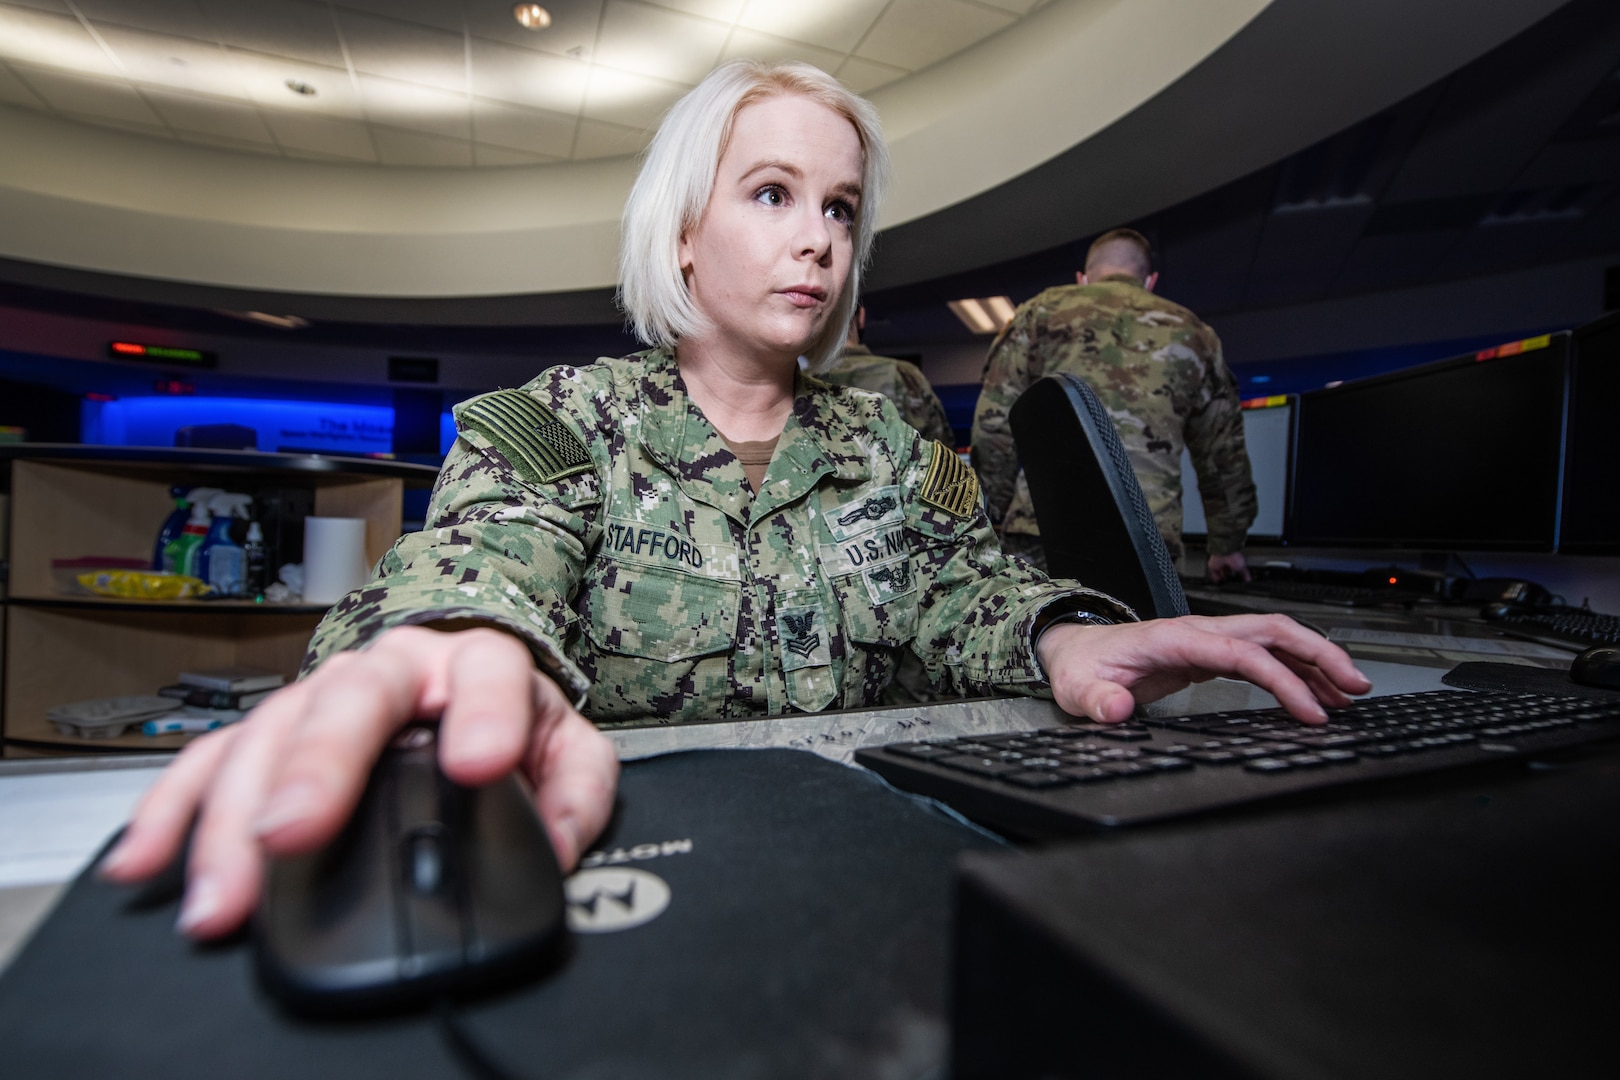 Navy member works on a computer.